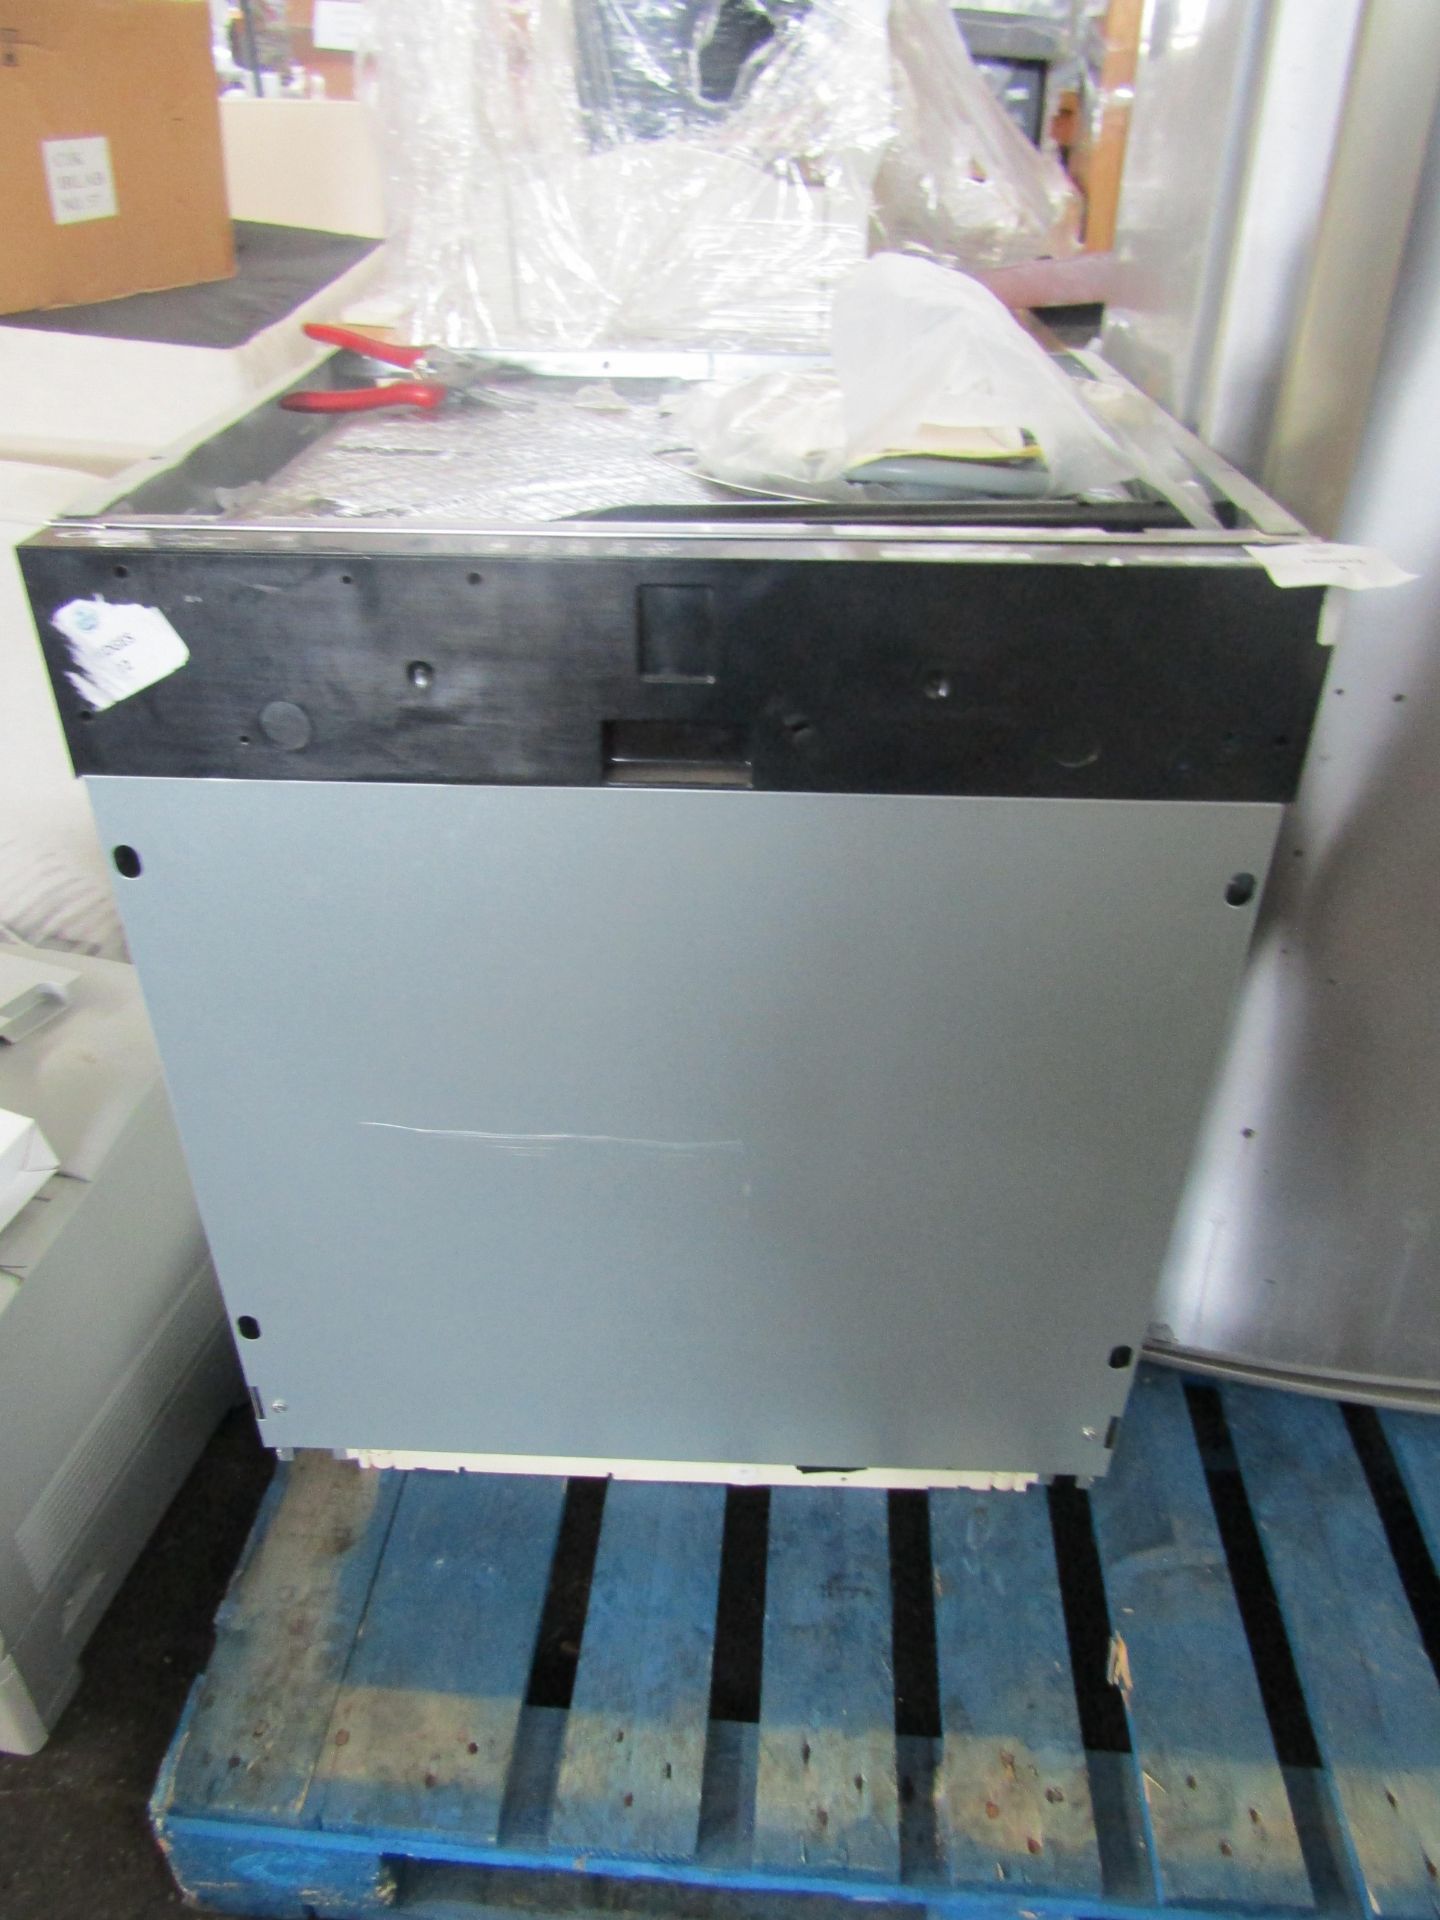 Candy - Biara Intergrated Dish-Washer - No Power. Need Intensive Clean. May Contains Dints Scratches